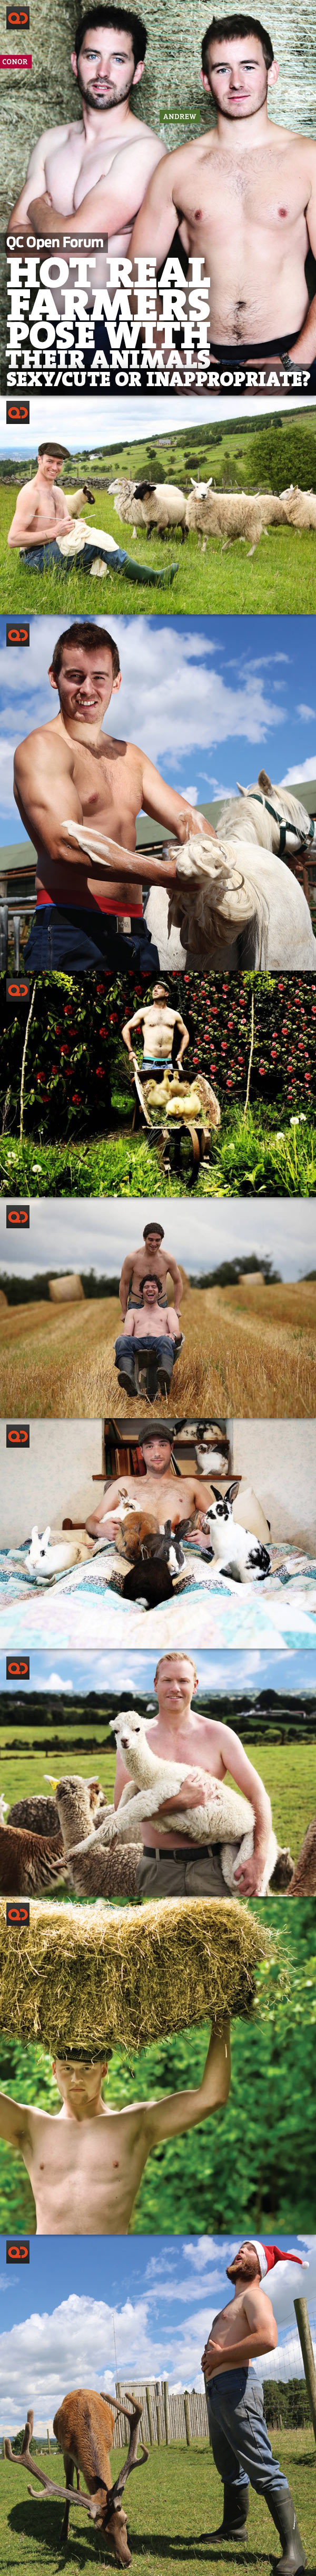 QC Open Forum: Hot Real Farmers Pose With Their Animals - Sexy/Cute Or Inappropriate?